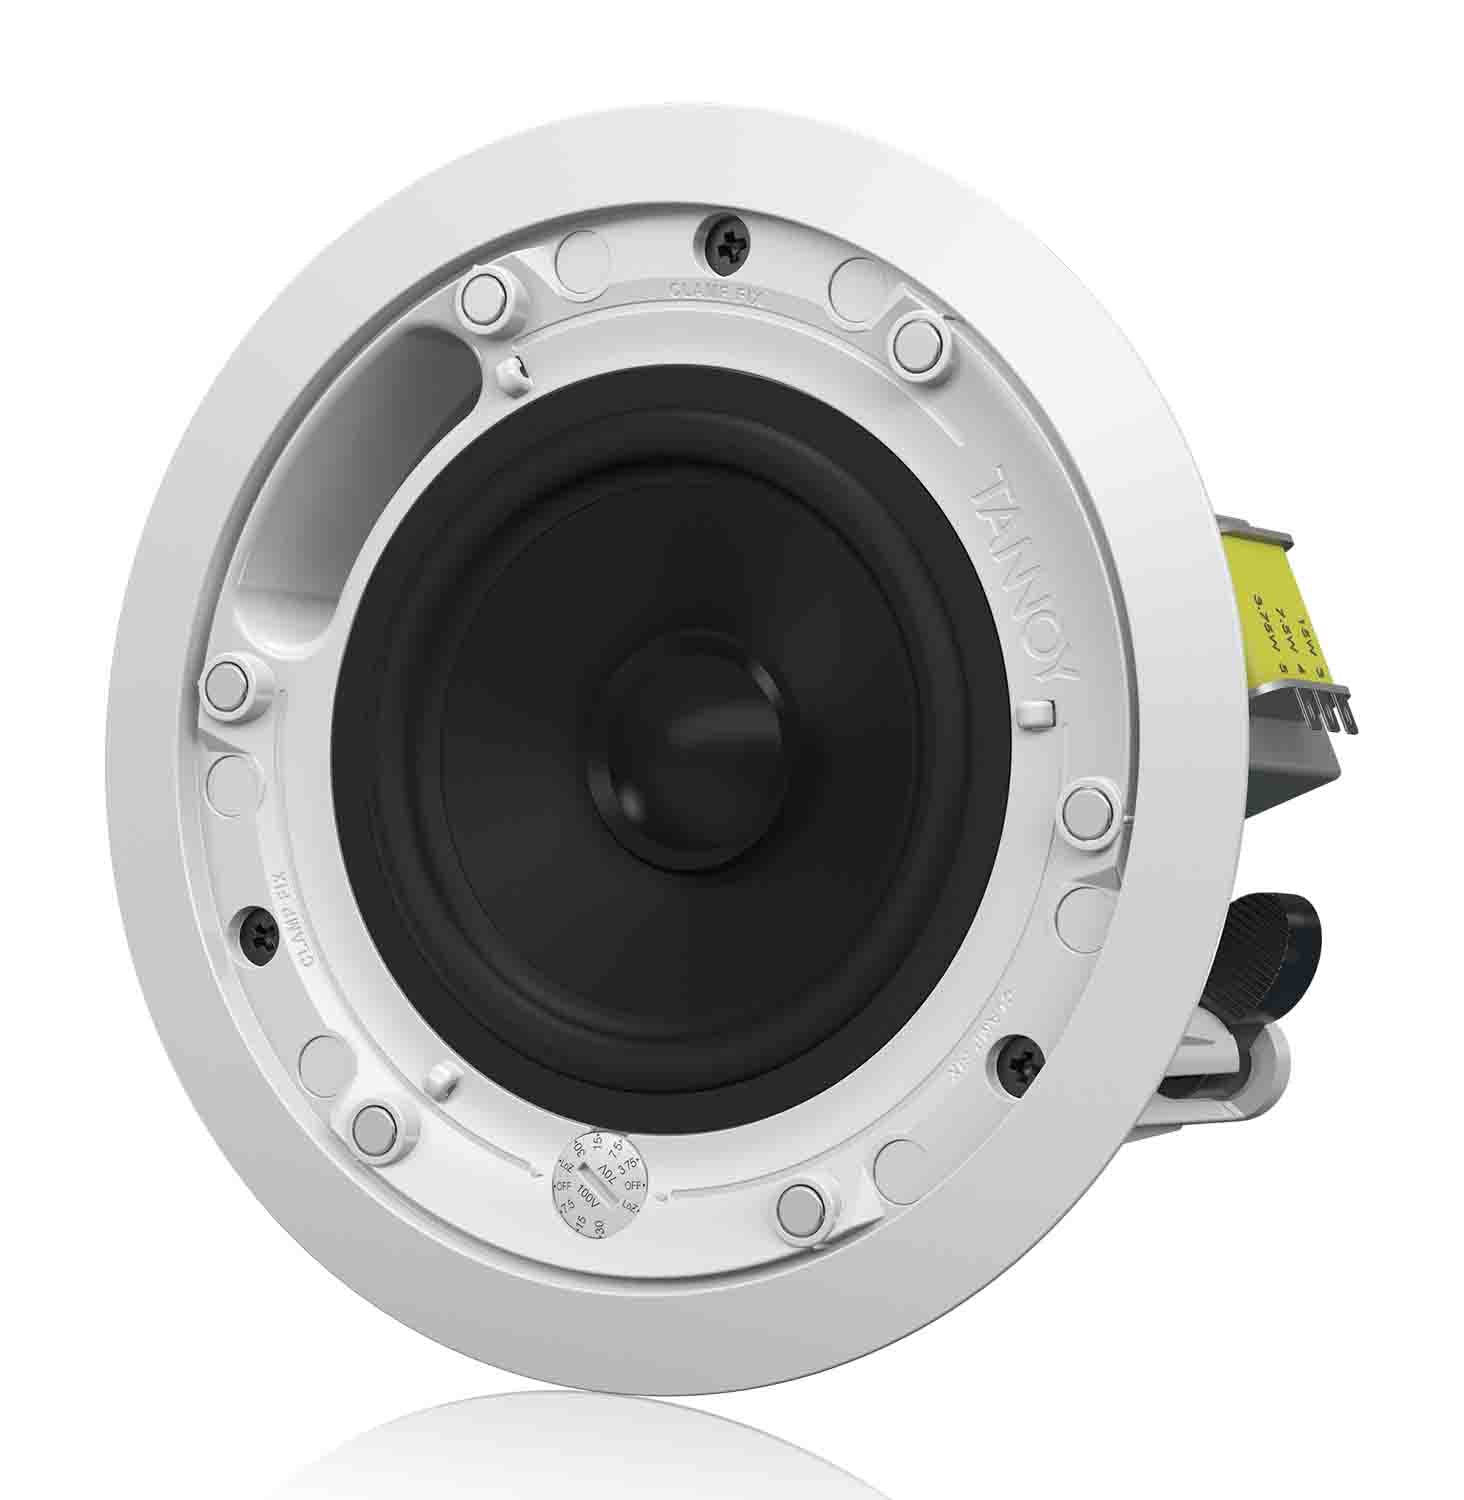 Tannoy CMS 503ICT PI, 5-Inch Full Range Ceiling Loudspeaker with ICT Driver for Installation Applications - Pre-Install - Hollywood DJ